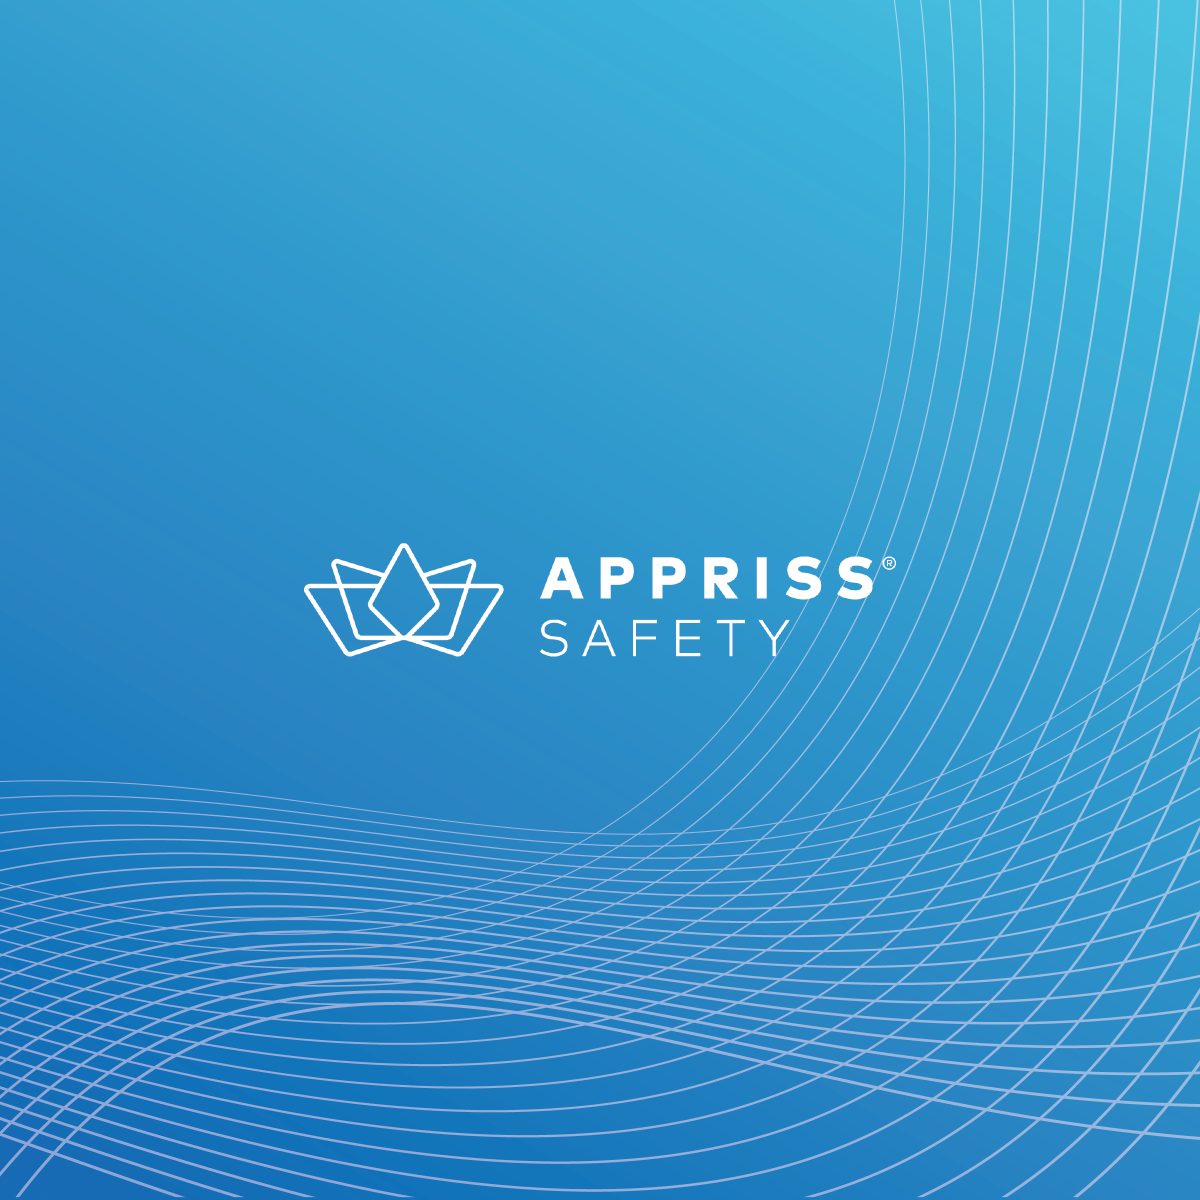 Appriss Logo - Overview - Appriss Safety